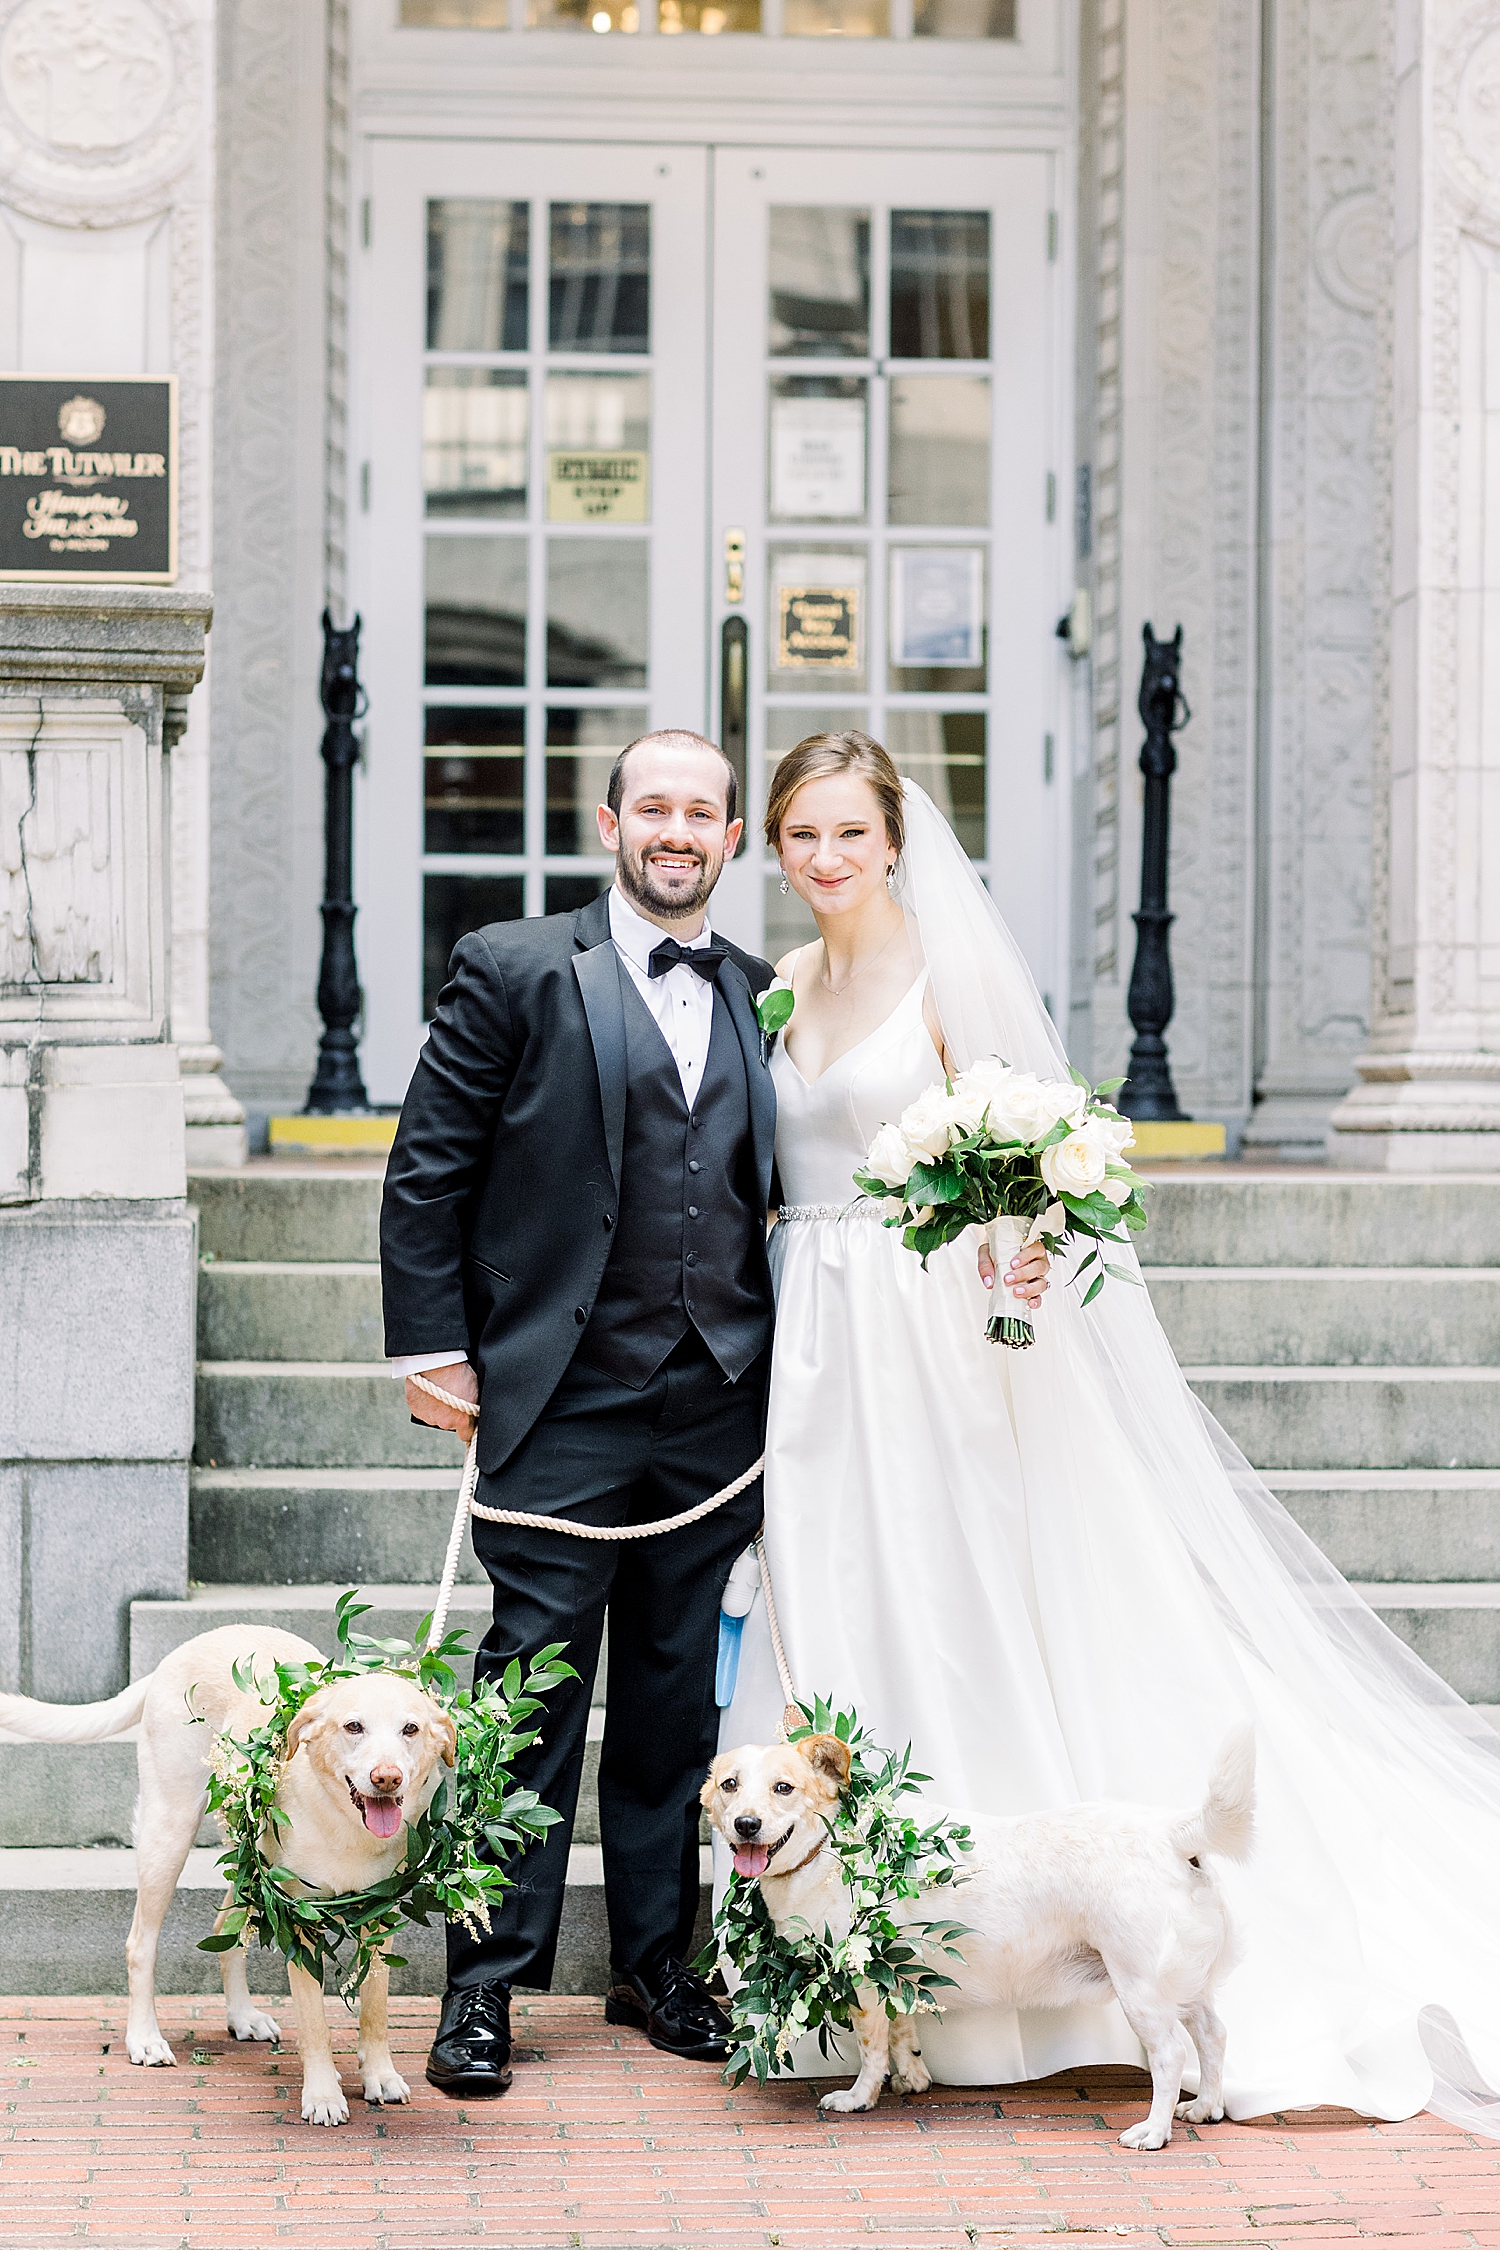 bride and groom pose with dogs in green collars